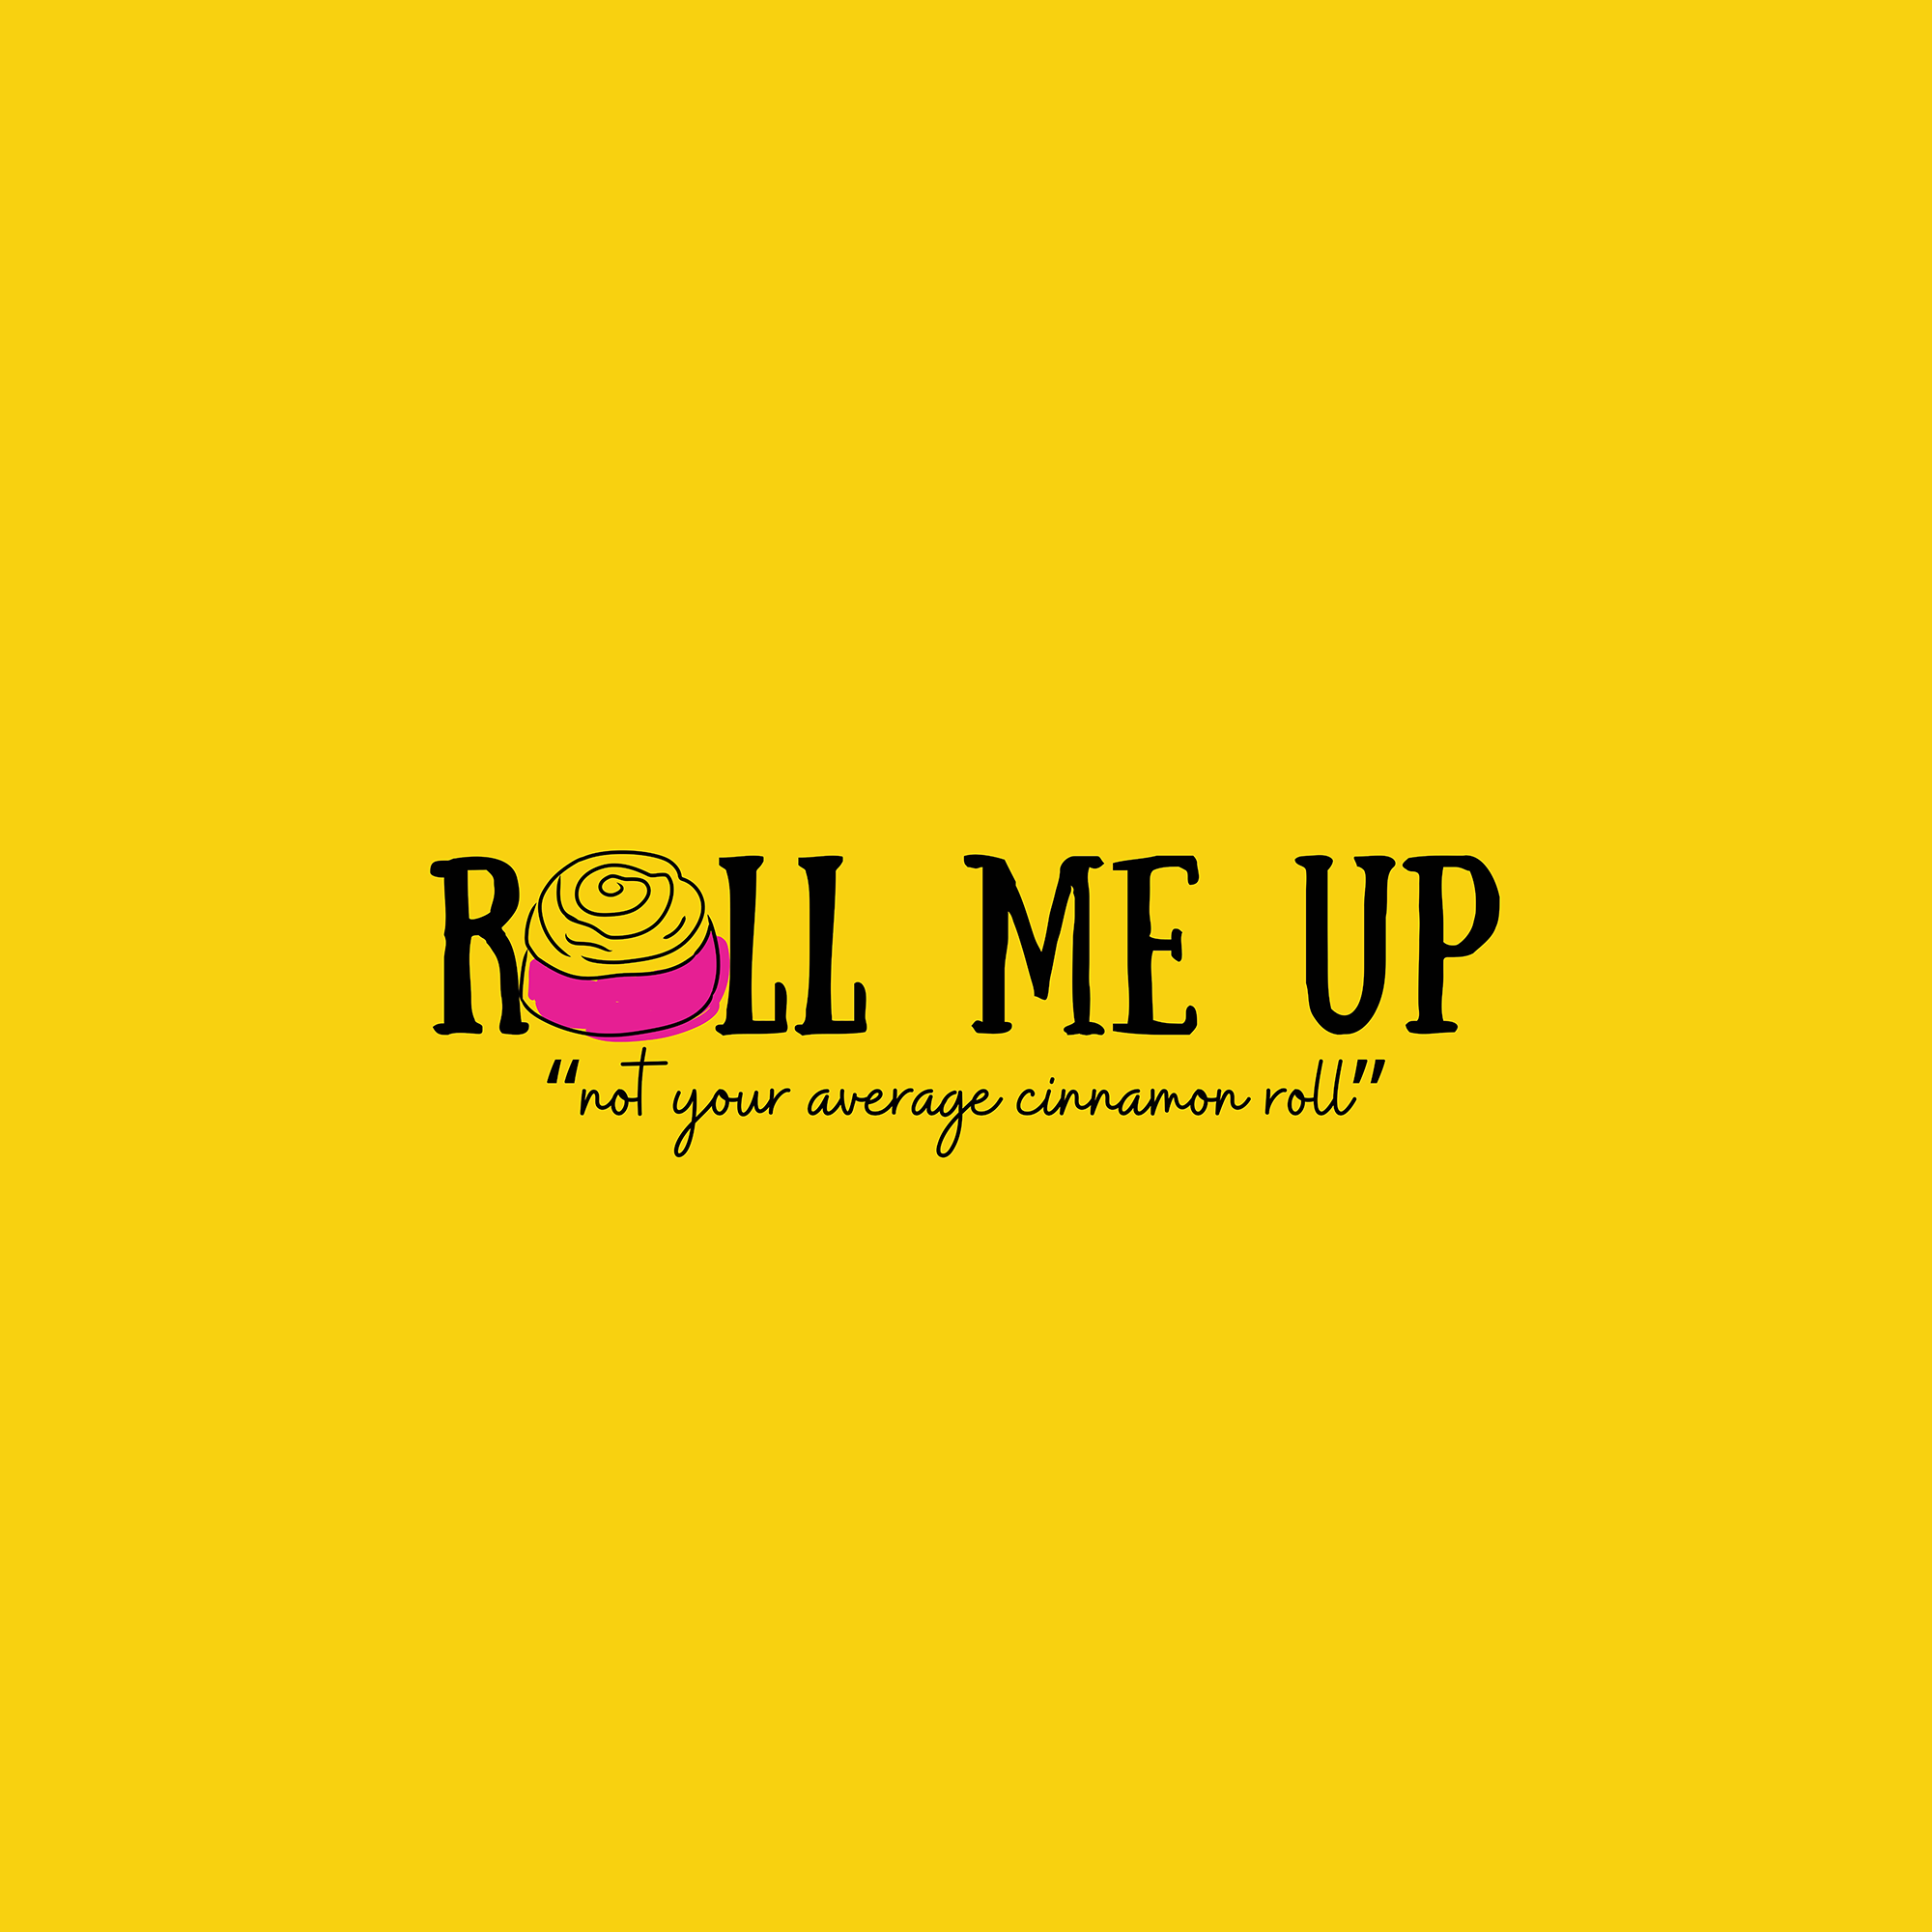 A photo of the Roll Me Up logo